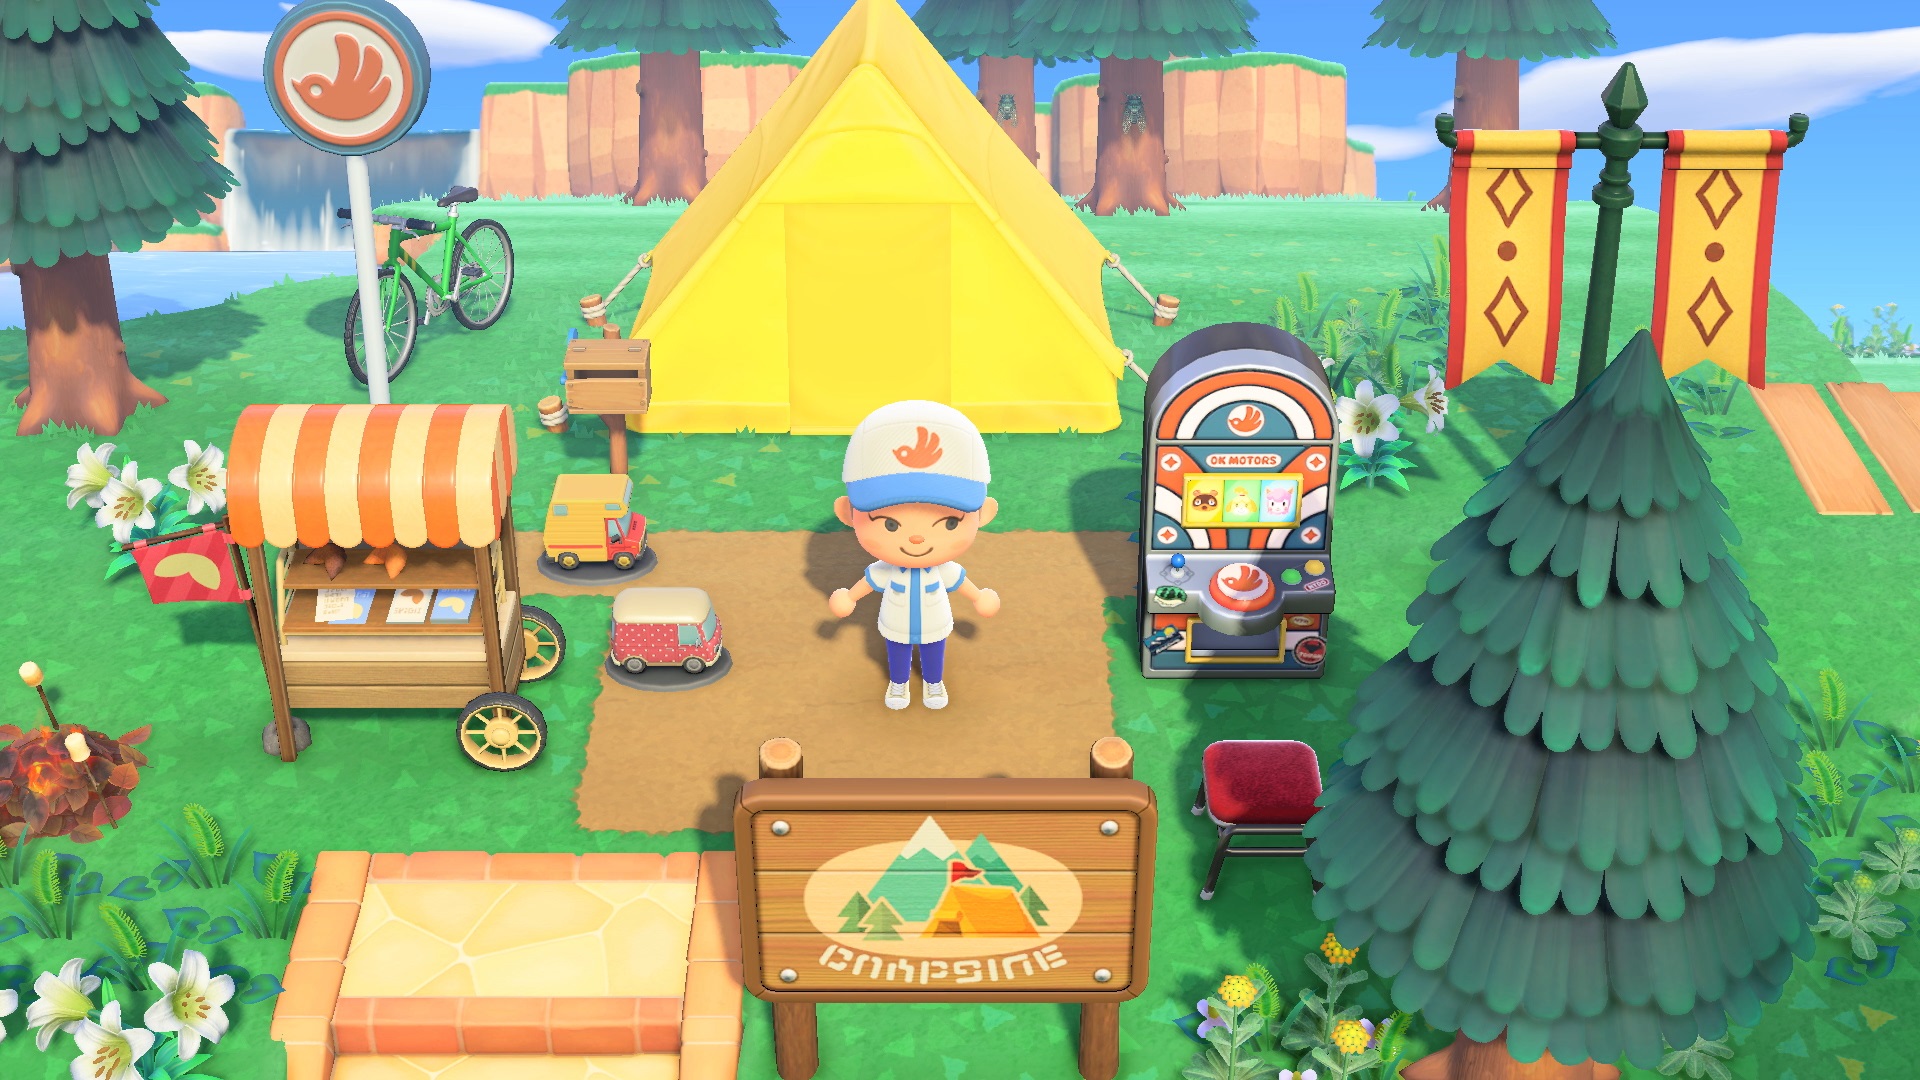 A screenshot from animal crossing new horizons, showing a player stood in the center of their early game camp